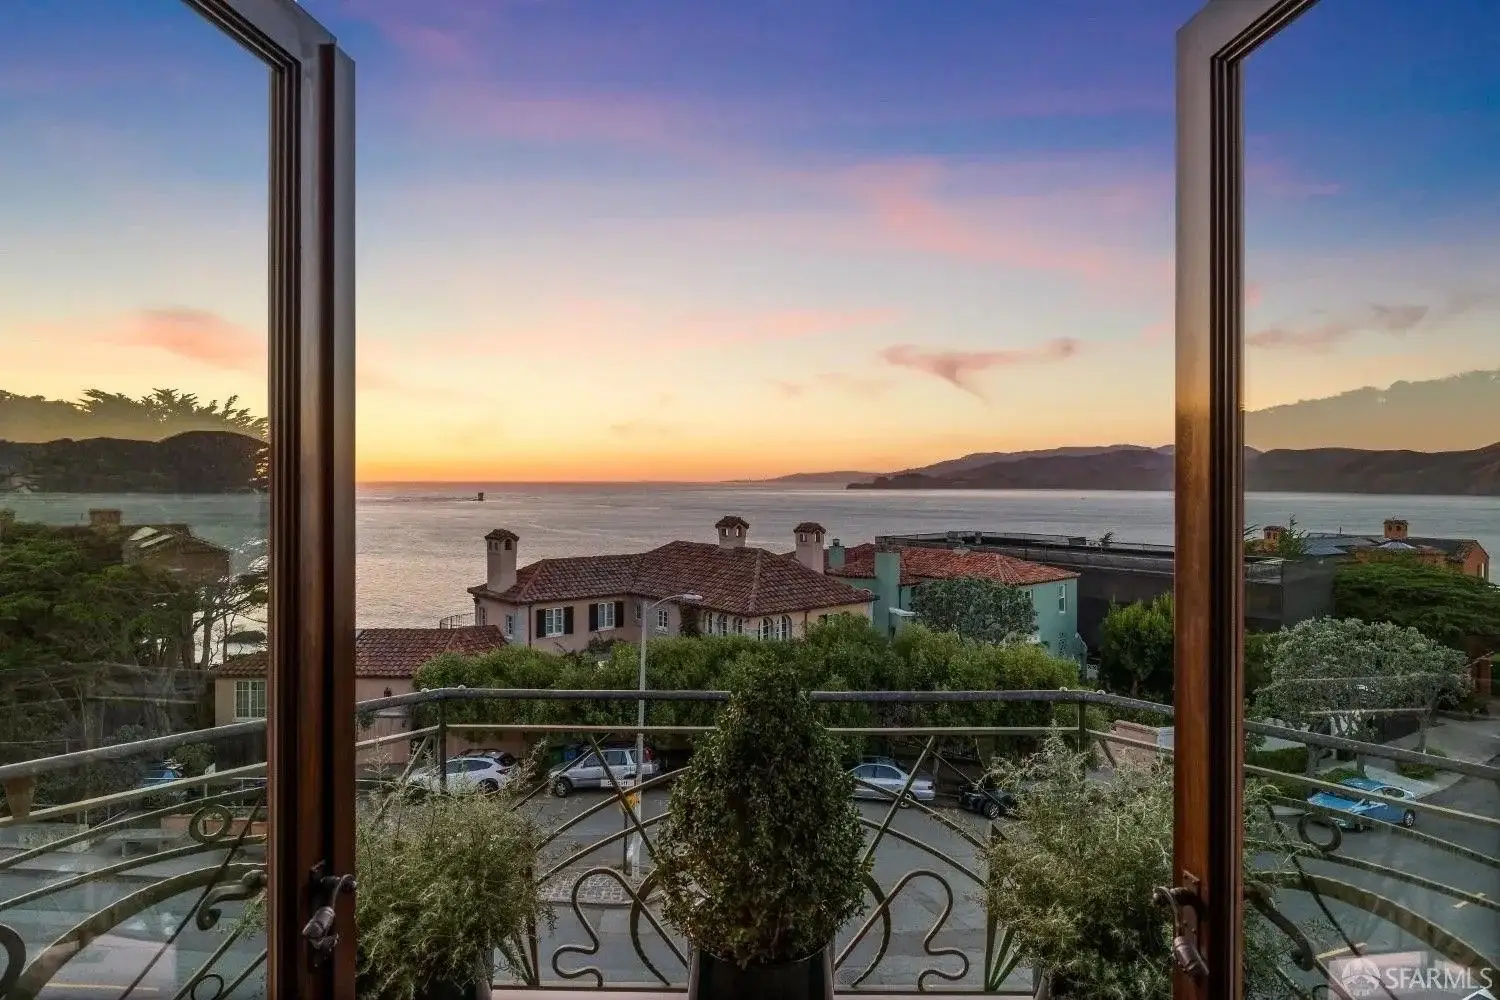 Imagine gazing at the San Francisco Bay from the balcony of your home.(Realtor.com)